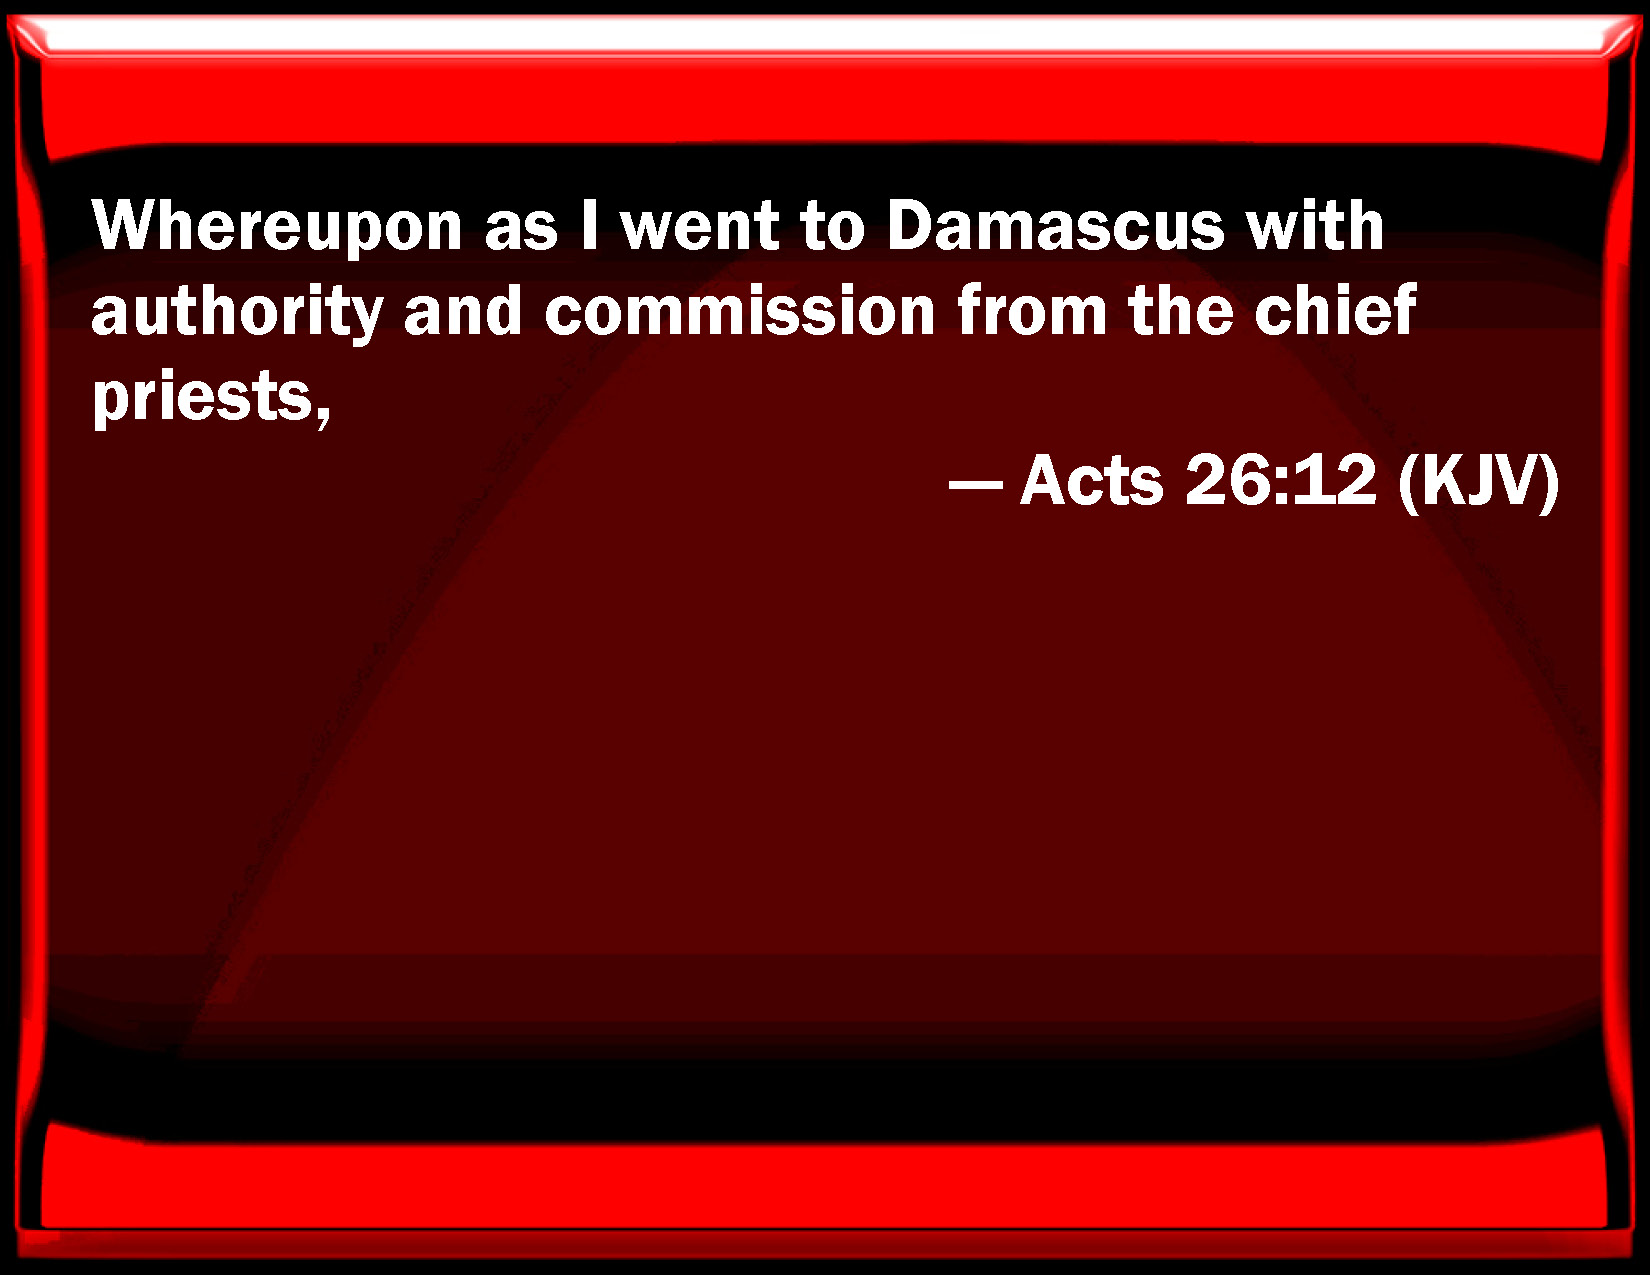 Acts 2612 Whereupon as I went to Damascus with authority and